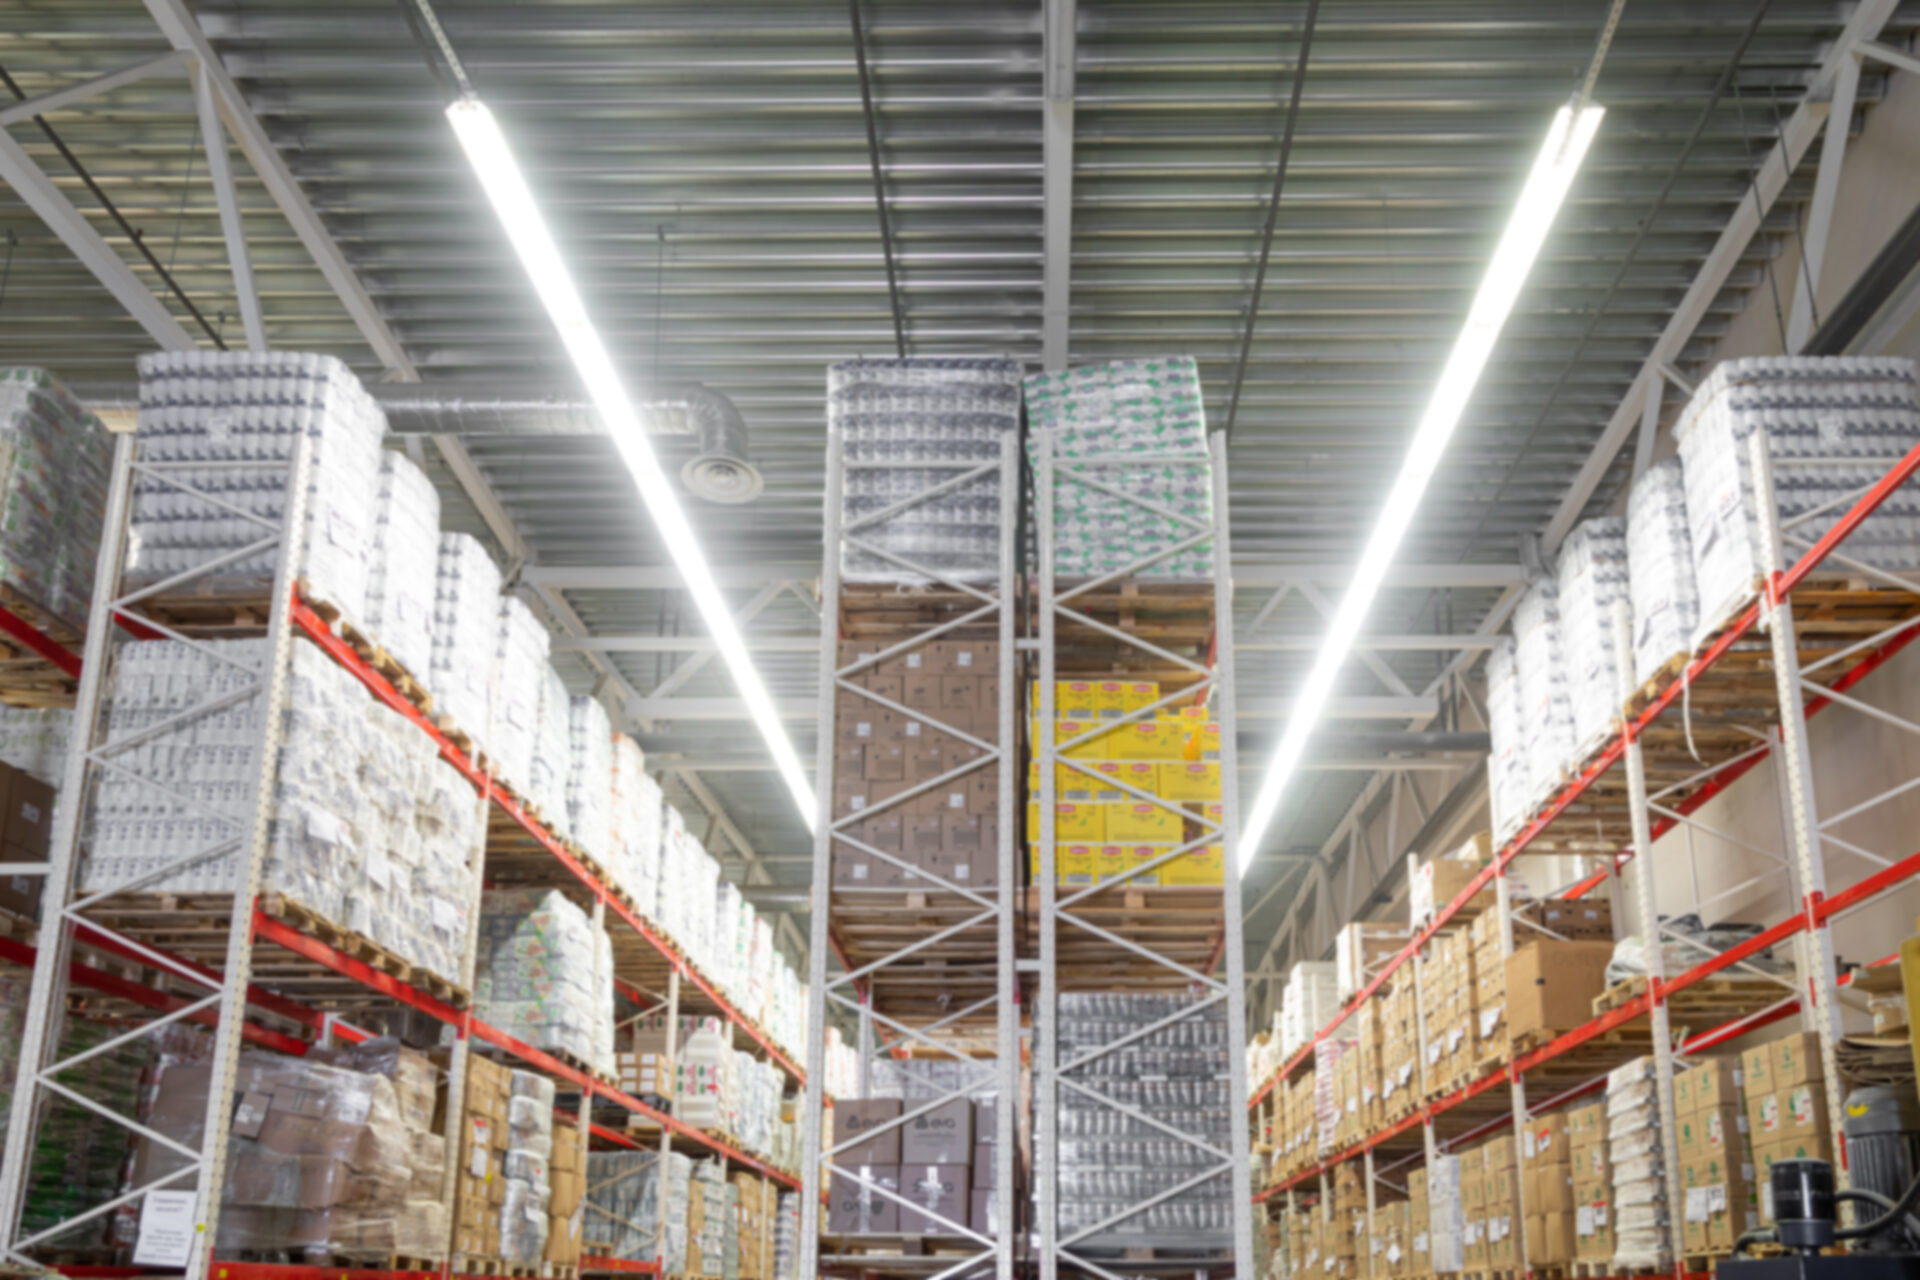 panoramic-photo-of-an-automated-warehouse-logistics-center-with-high-bay-shelving-blurred-photography-defocus